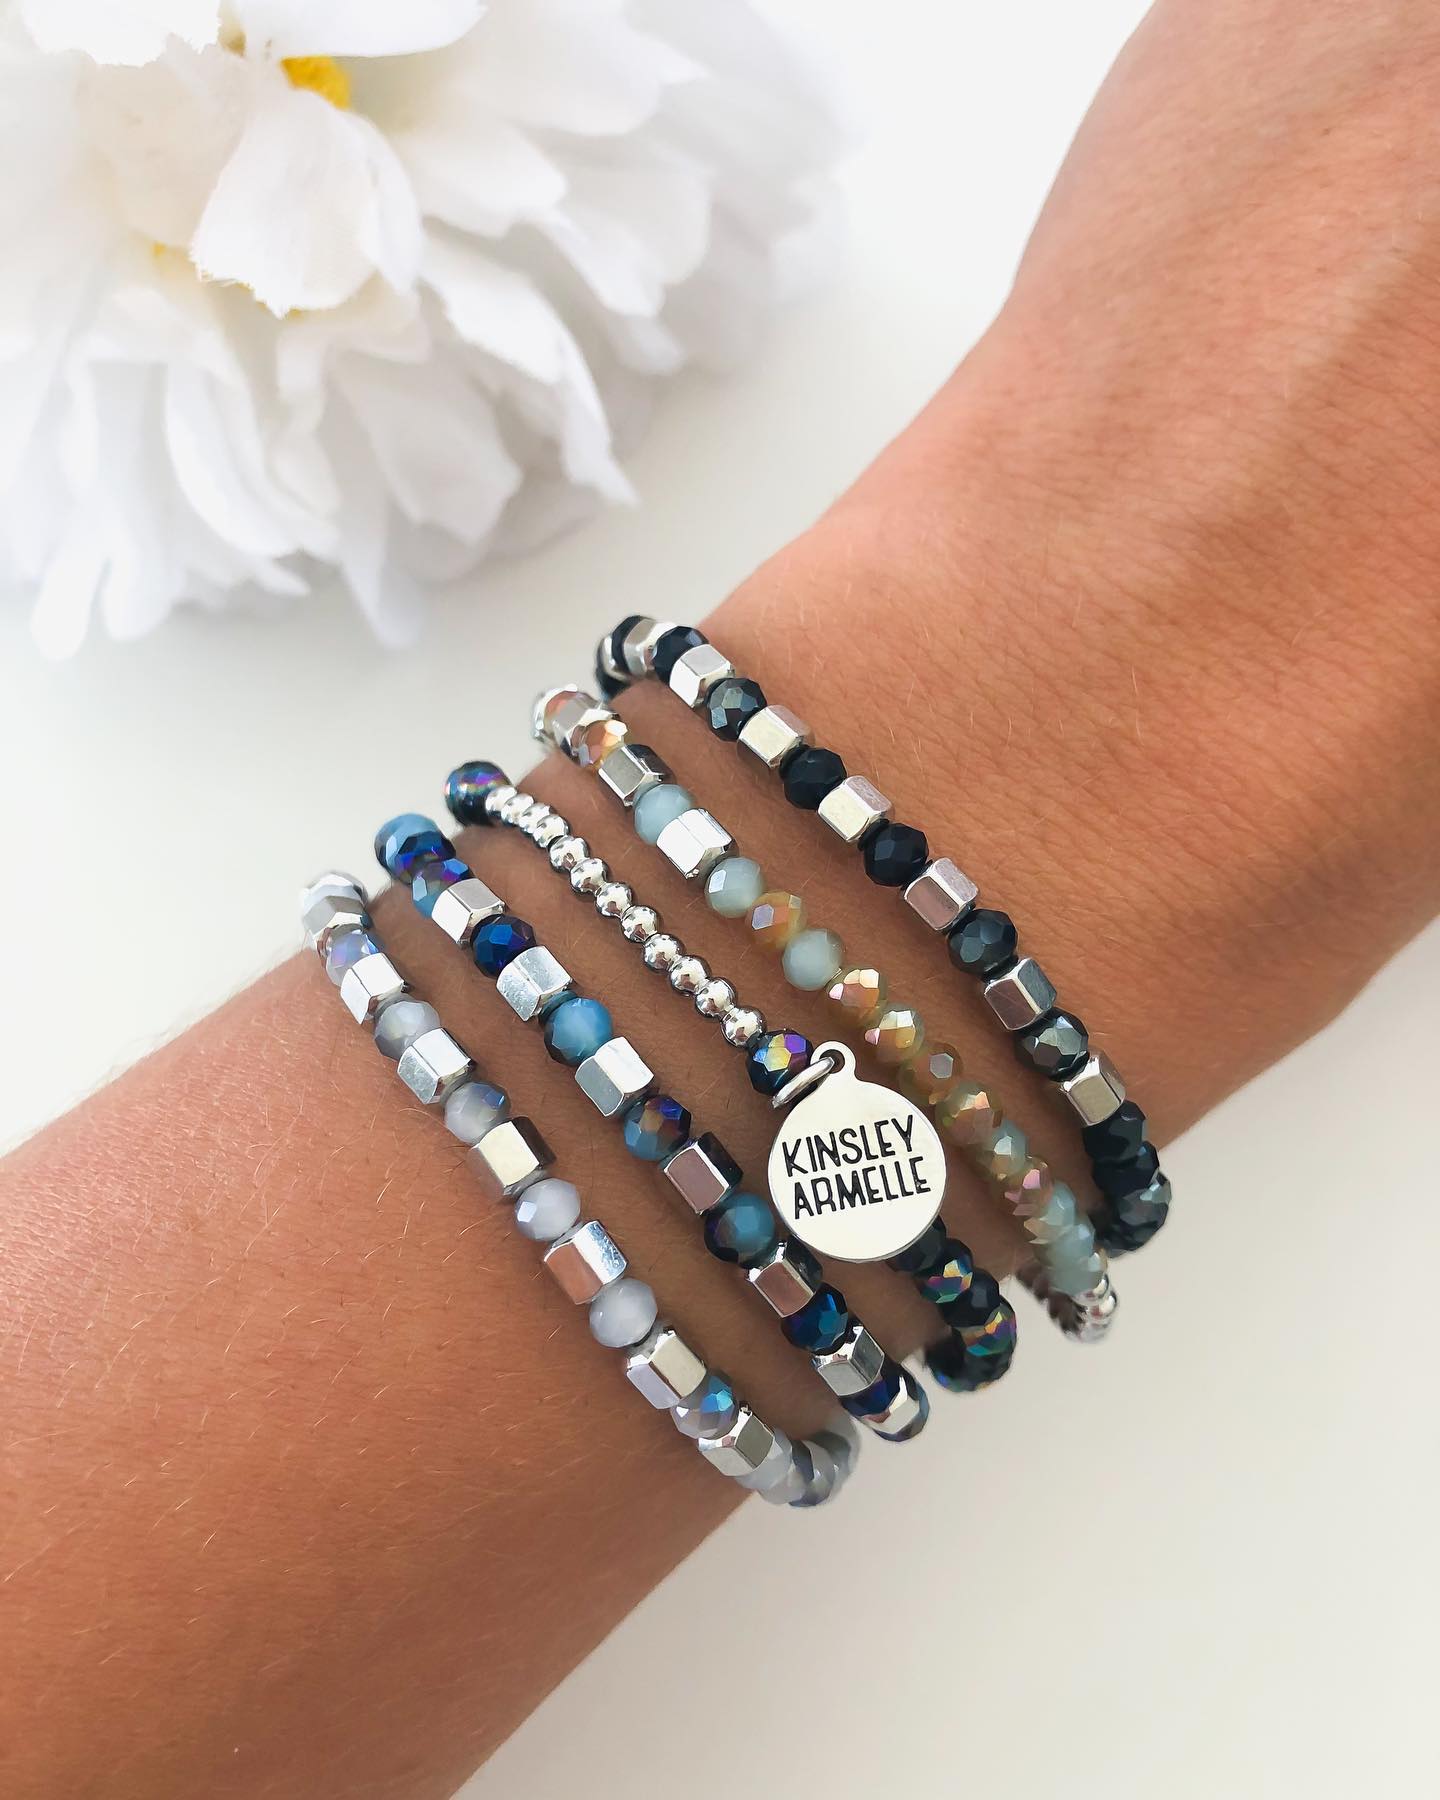 Stacked Collection - Silver Liberty Bracelet Set